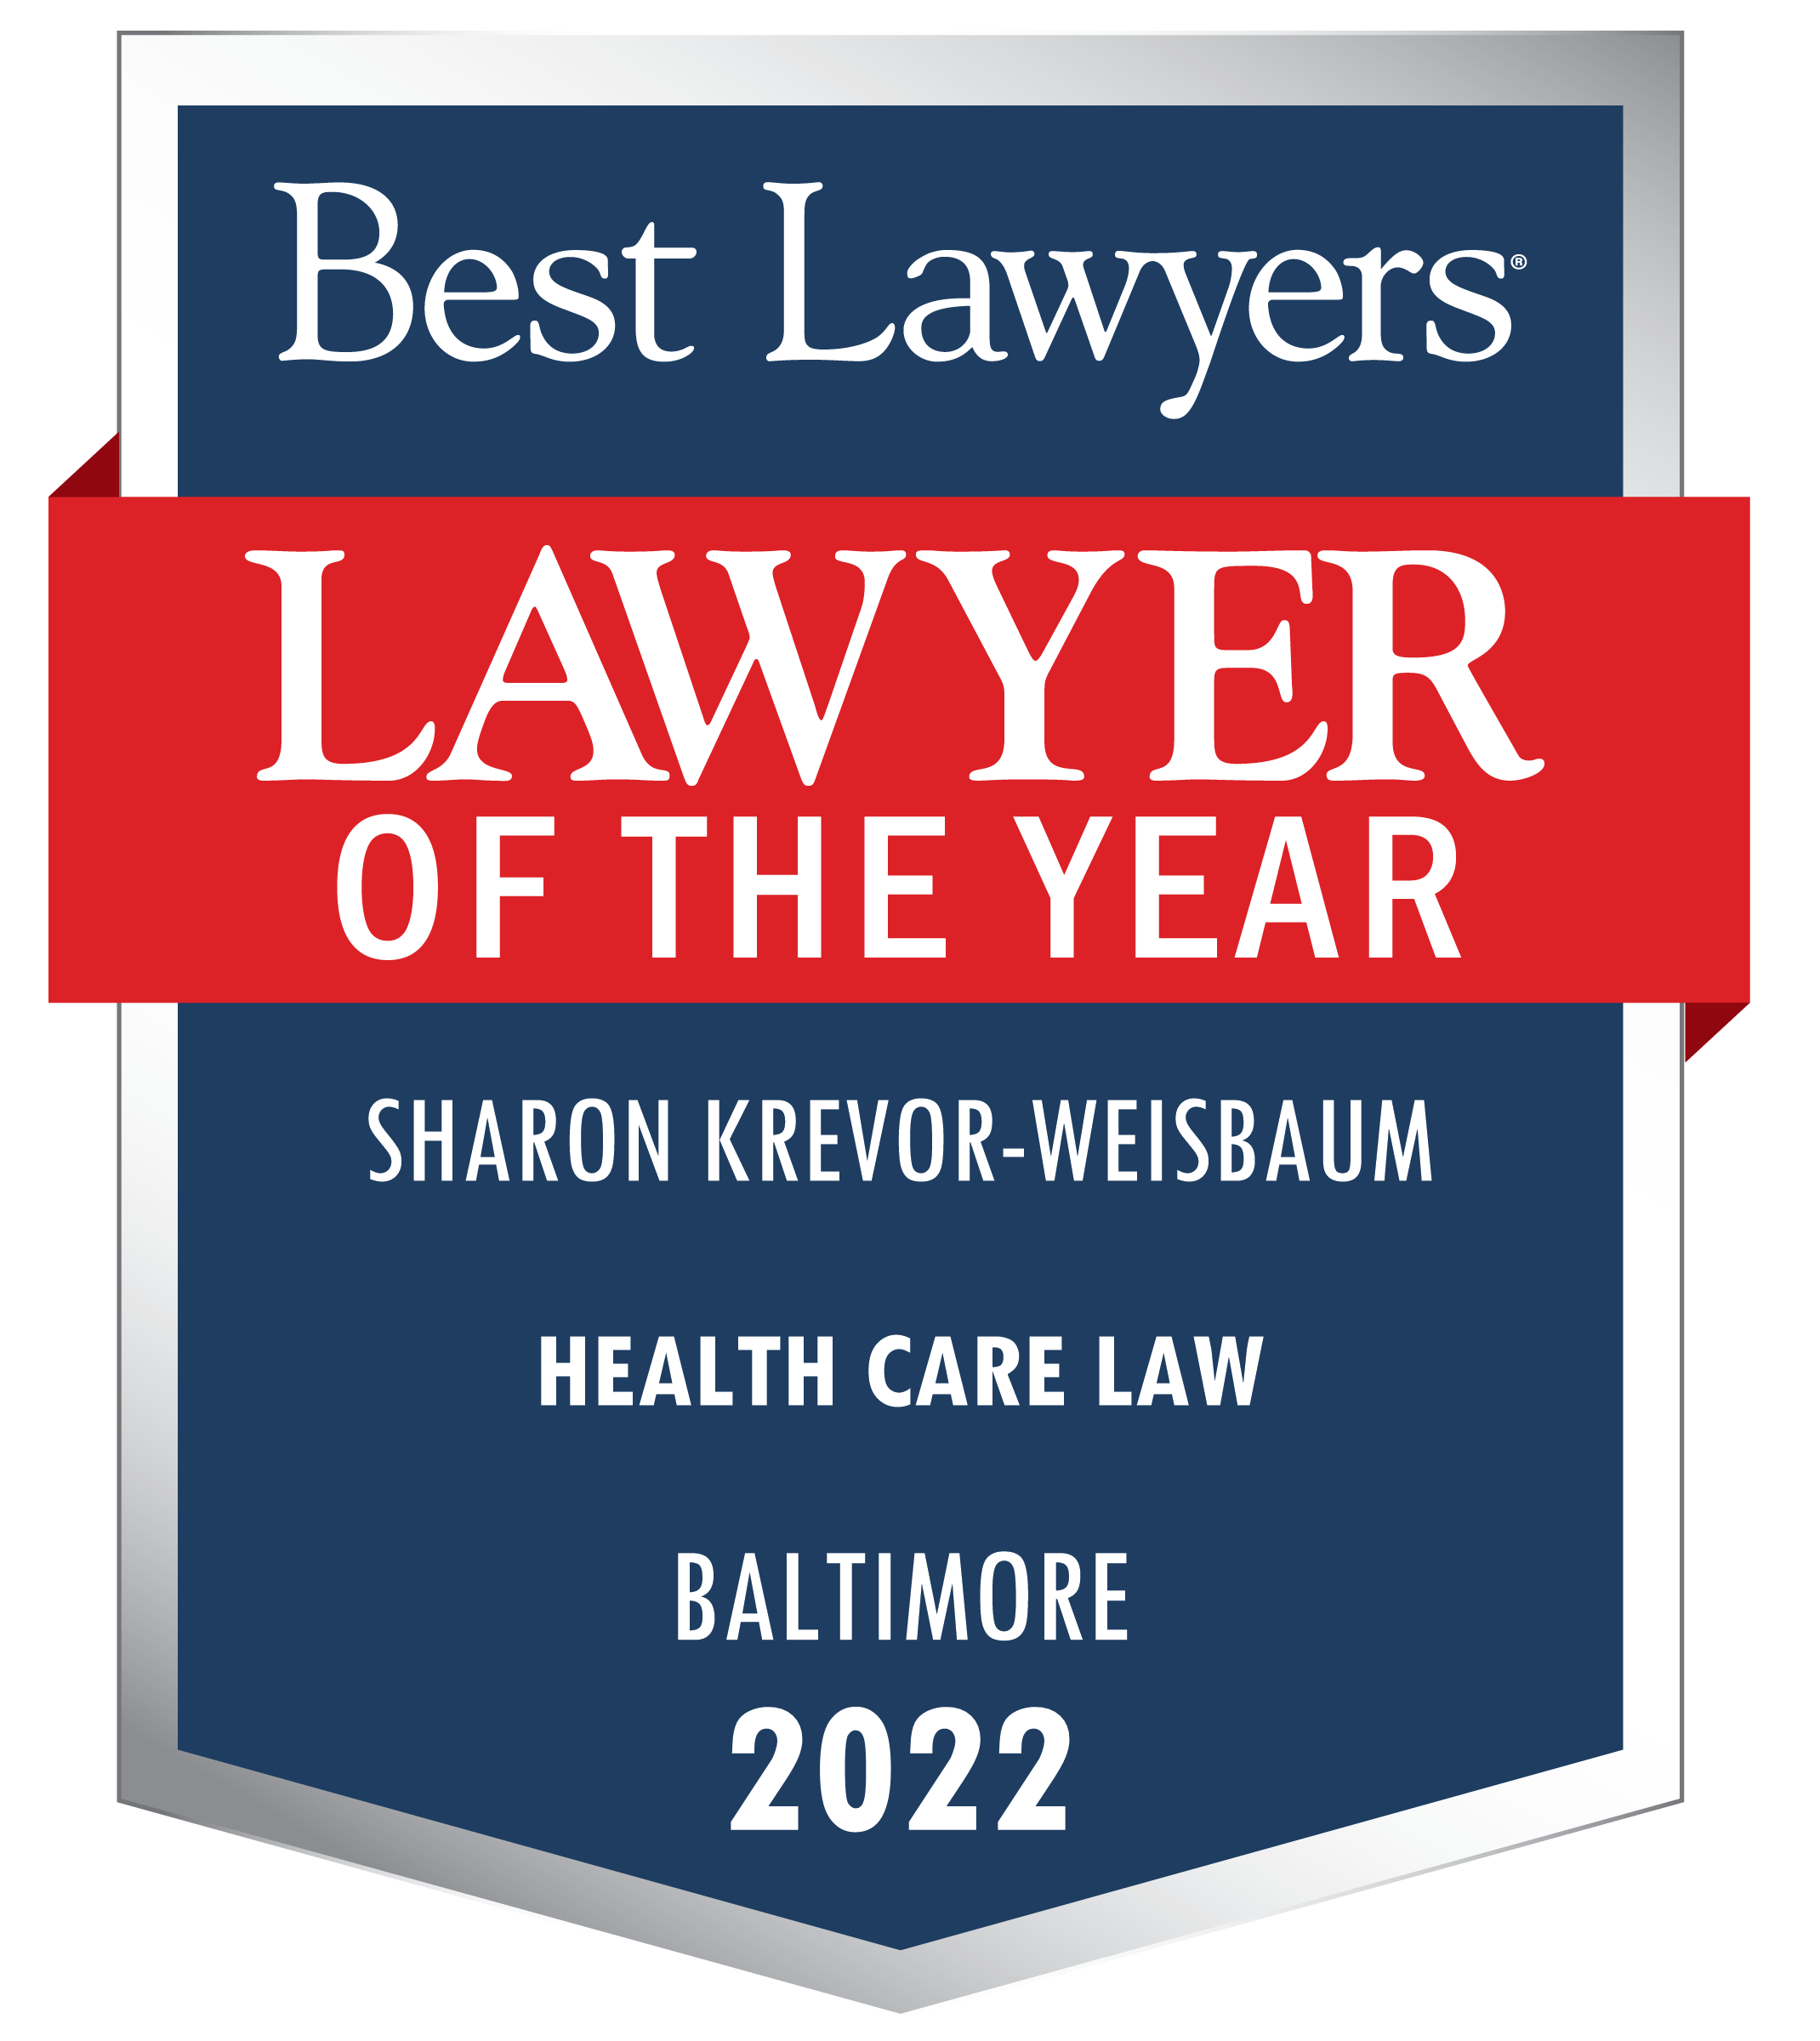 SKW-Best-Lawyers-Lawyer-of-the-Year-Contemporary-Logo2